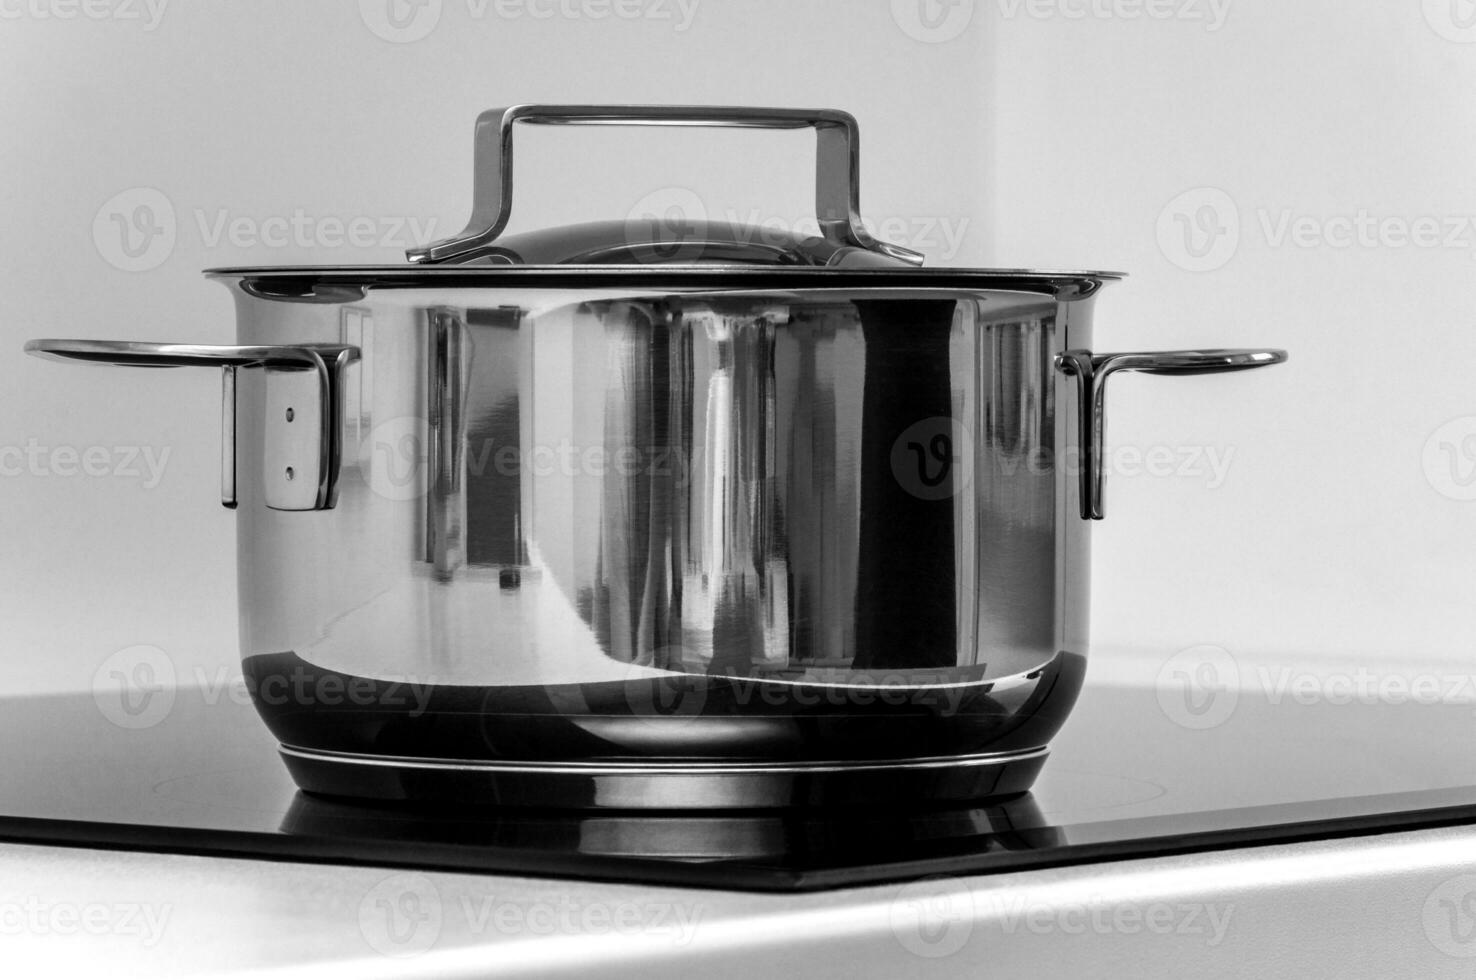 Stainless steel cooking pot on the induction stove photo